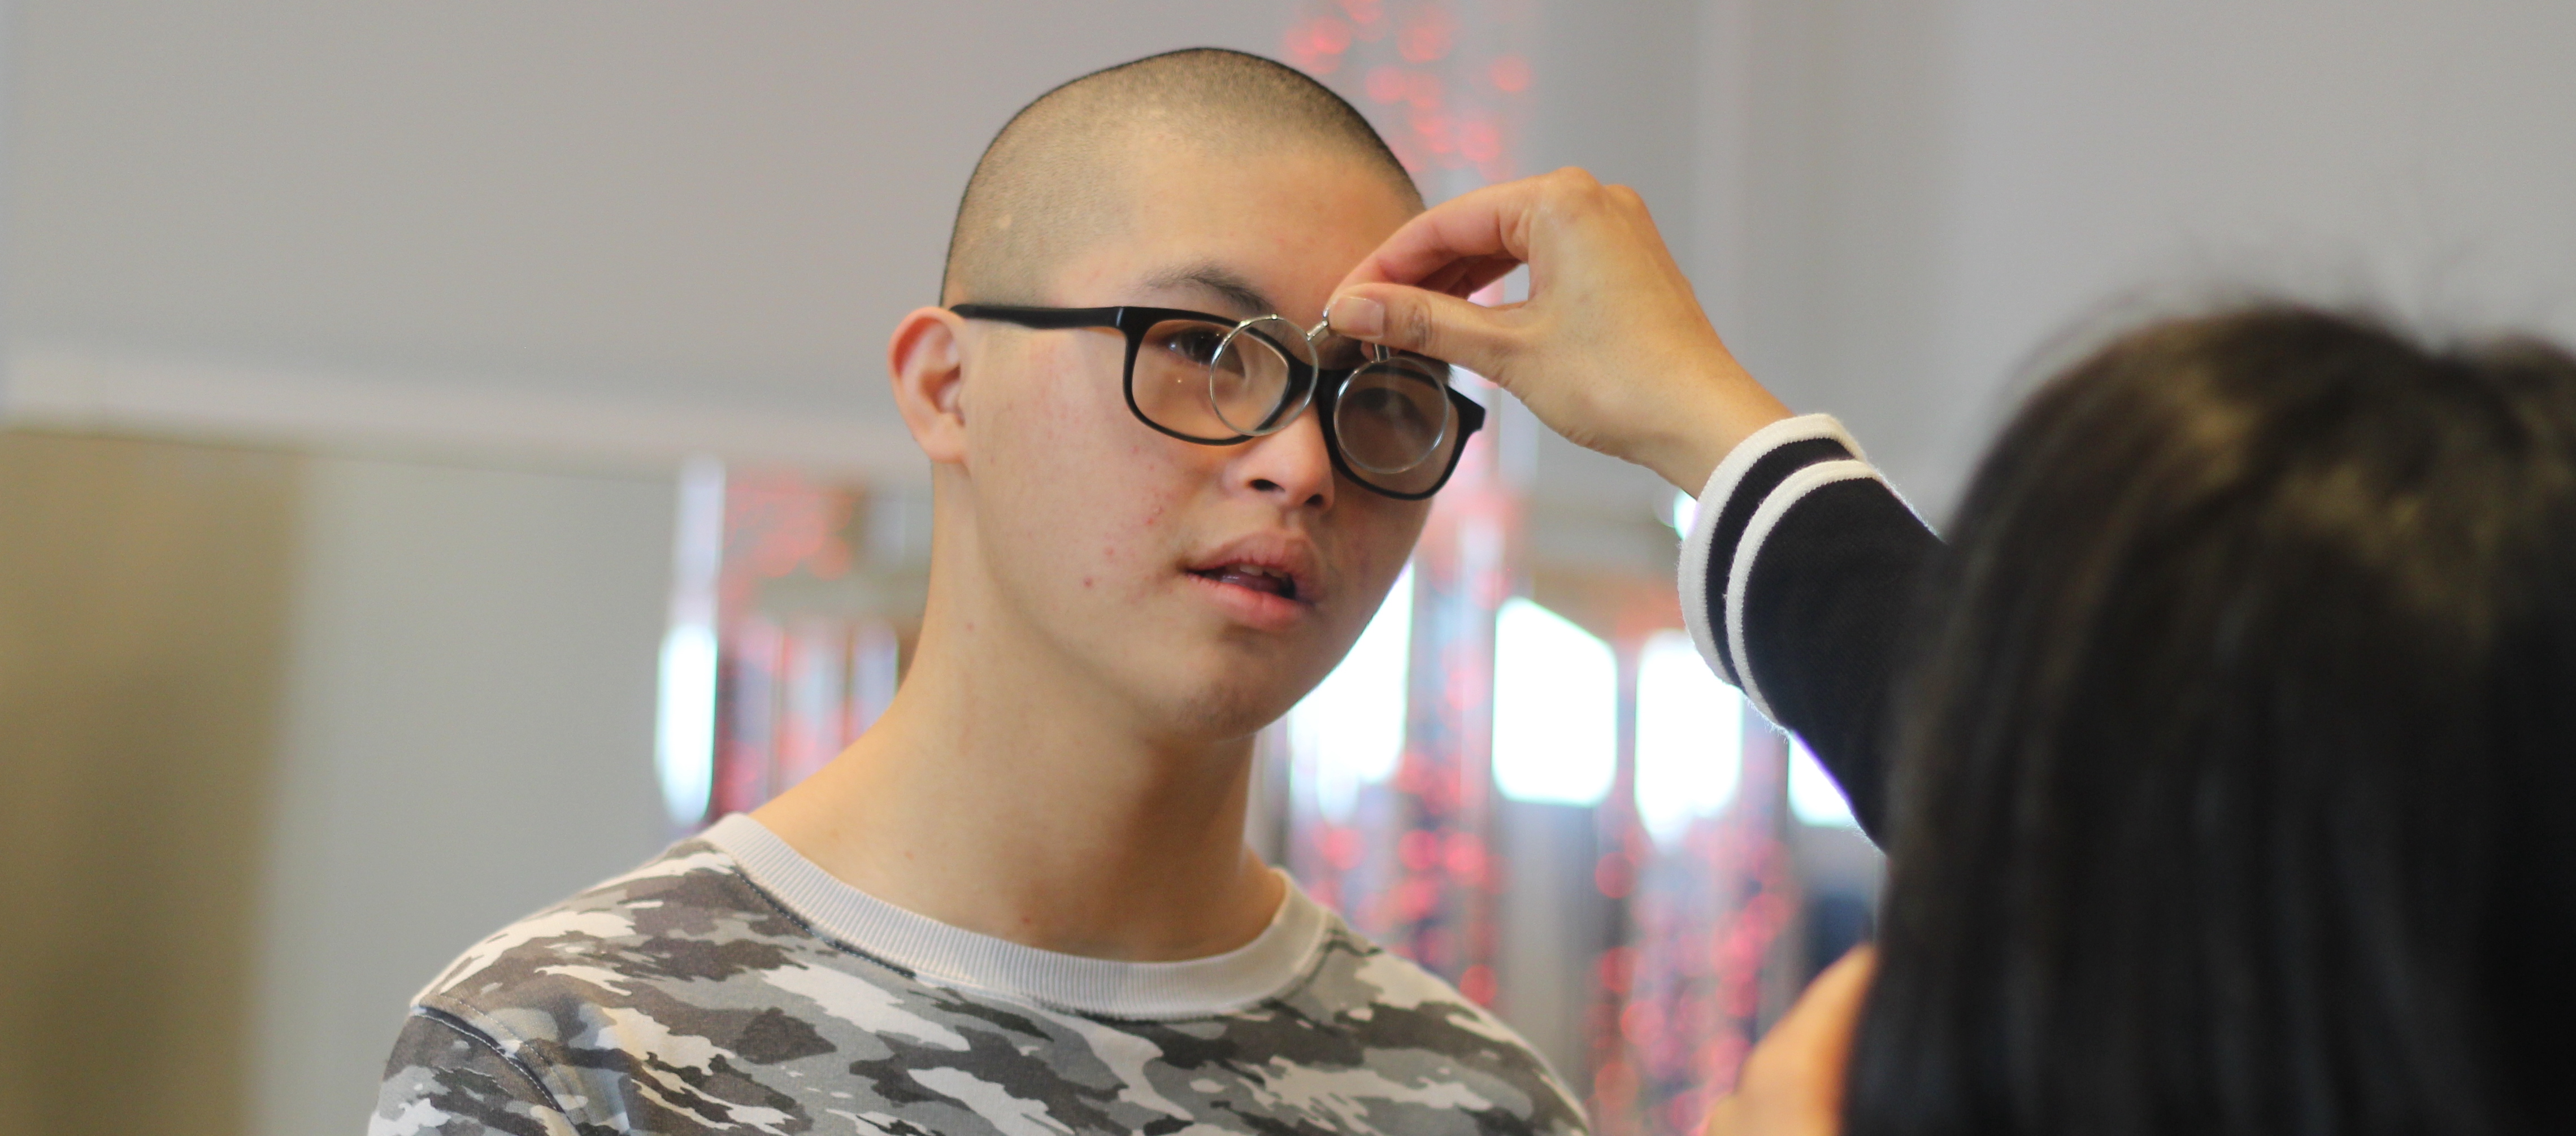 A boy having his eyes tested